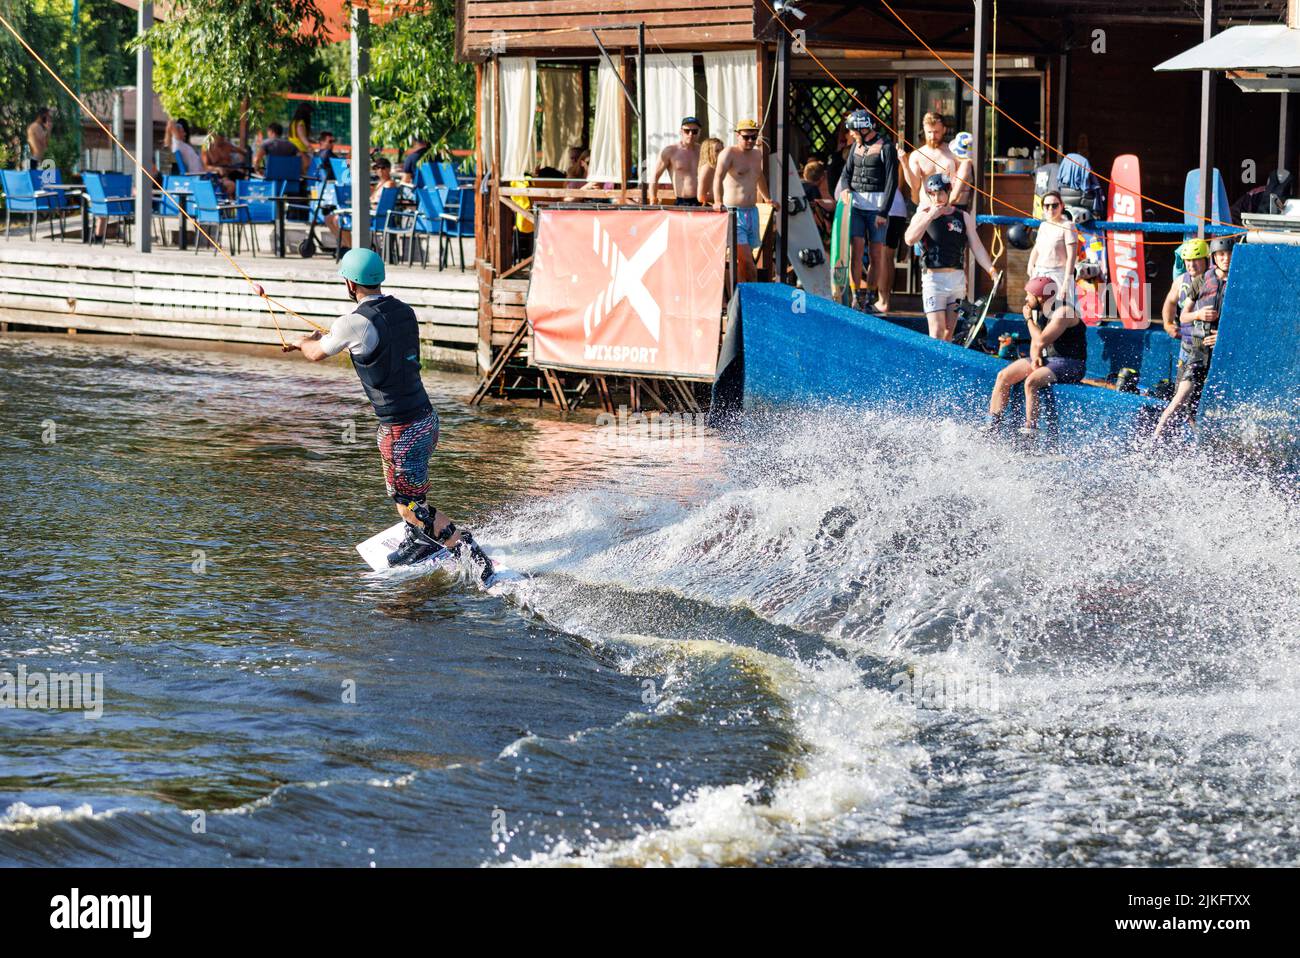 An athlete wakeboarder dynamically makes a U-turn on a water board in front of the stands of spectators on a summer day. 06.19.1922. Kyiv. Ukraine. Stock Photo